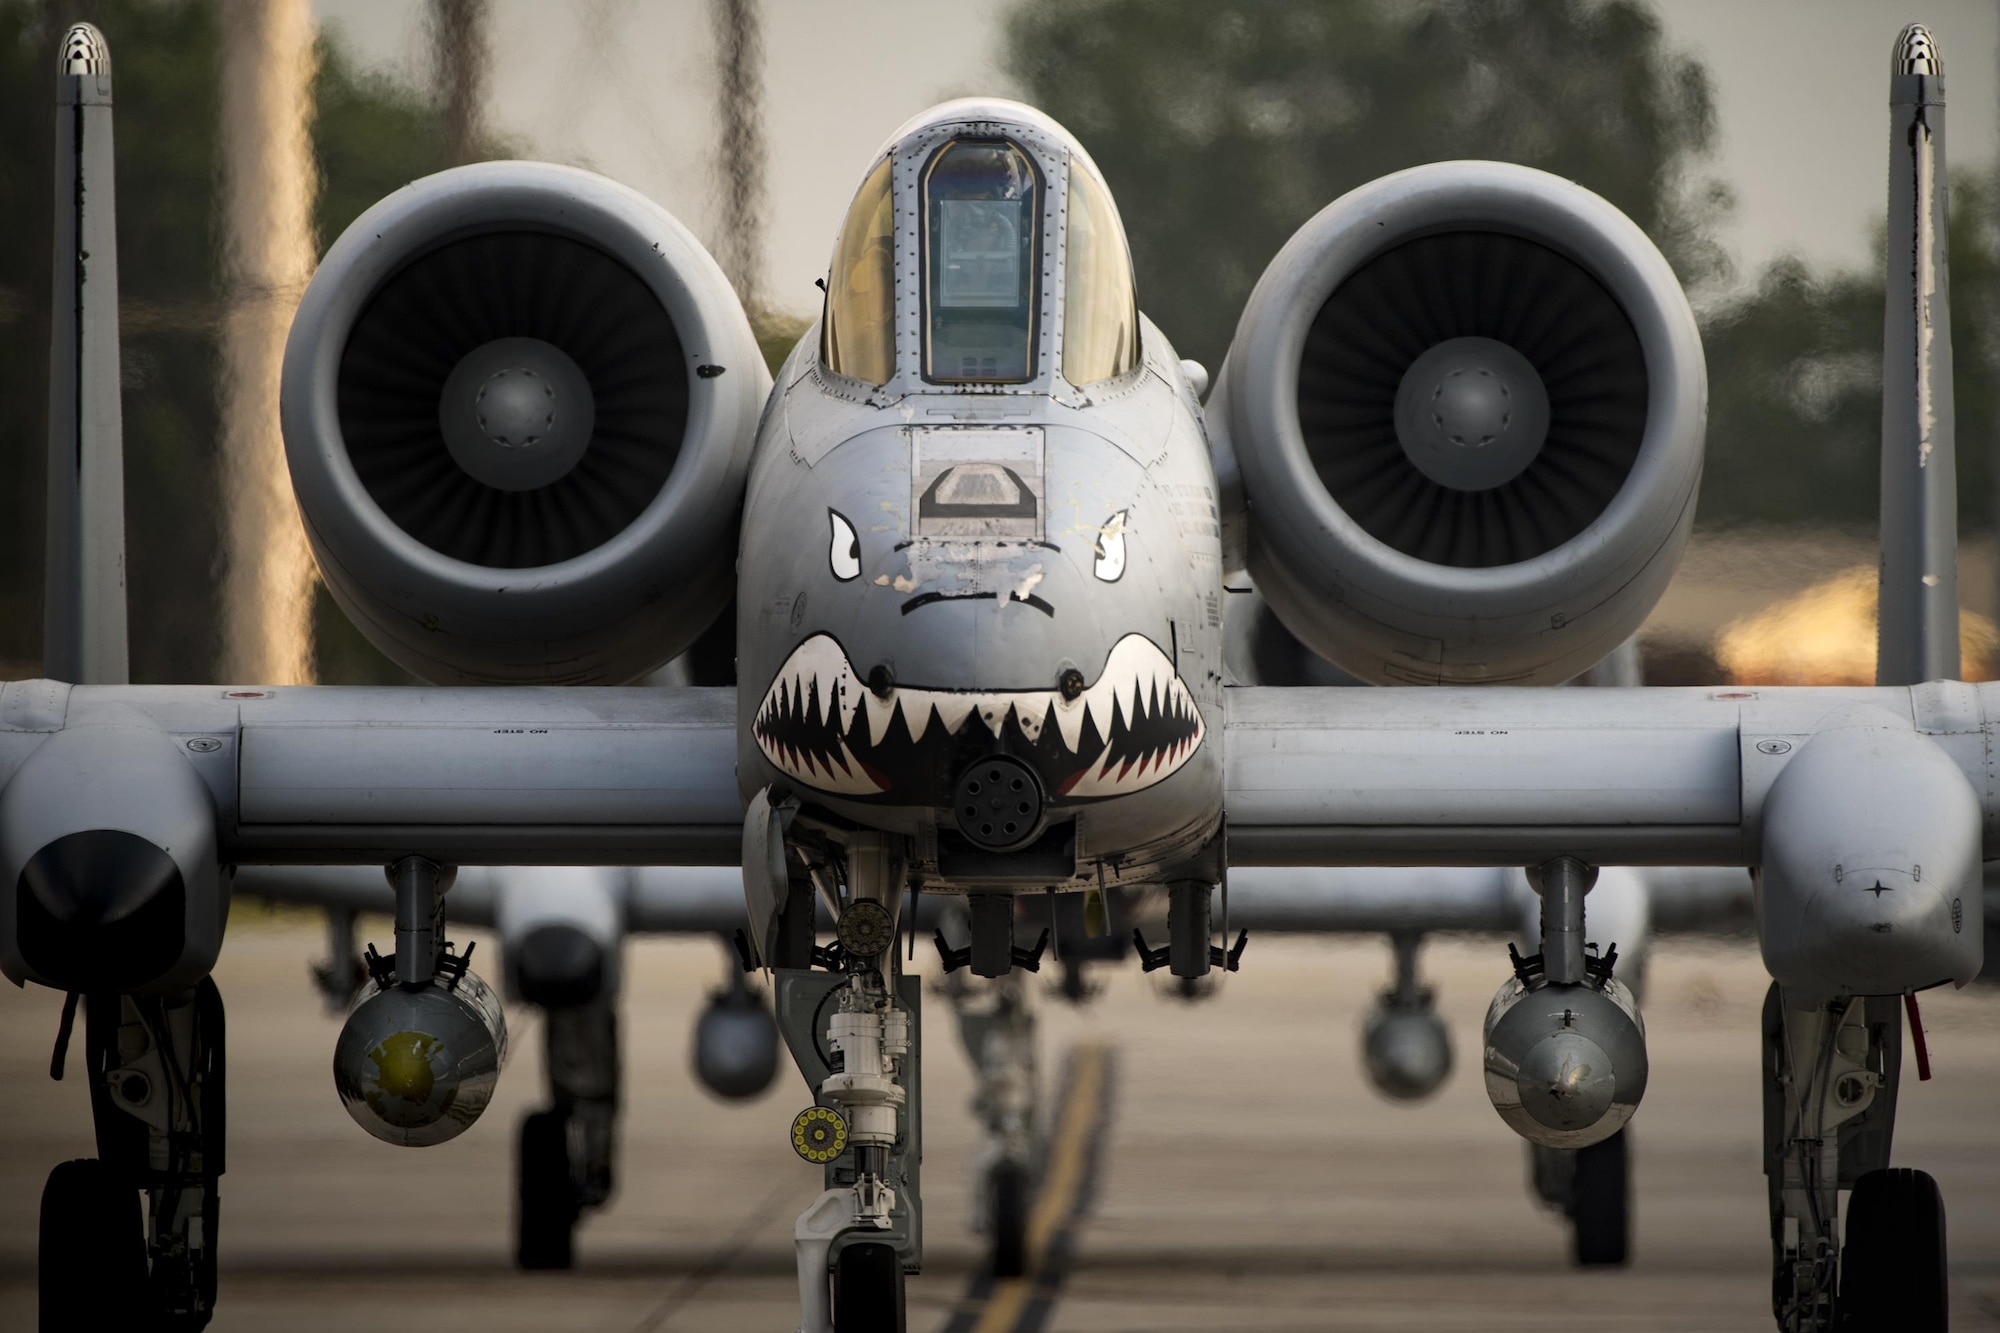 An A-10C Thunderbolt II pilot from the 75th Fighter Squadron taxis down the runway prior to take off, April 28, 2017, at Moody Air Force Base, Ga. The 75th FS departed for Combat Hammer, an air-to-ground exercise hosted at Hill Air Force Base, Utah. The exercise is designed to collect and analyze data on the performance of precision weapons and measure their suitability for use in combat.  (U.S. Air Force photo by Staff Sgt. Ryan Callaghan)